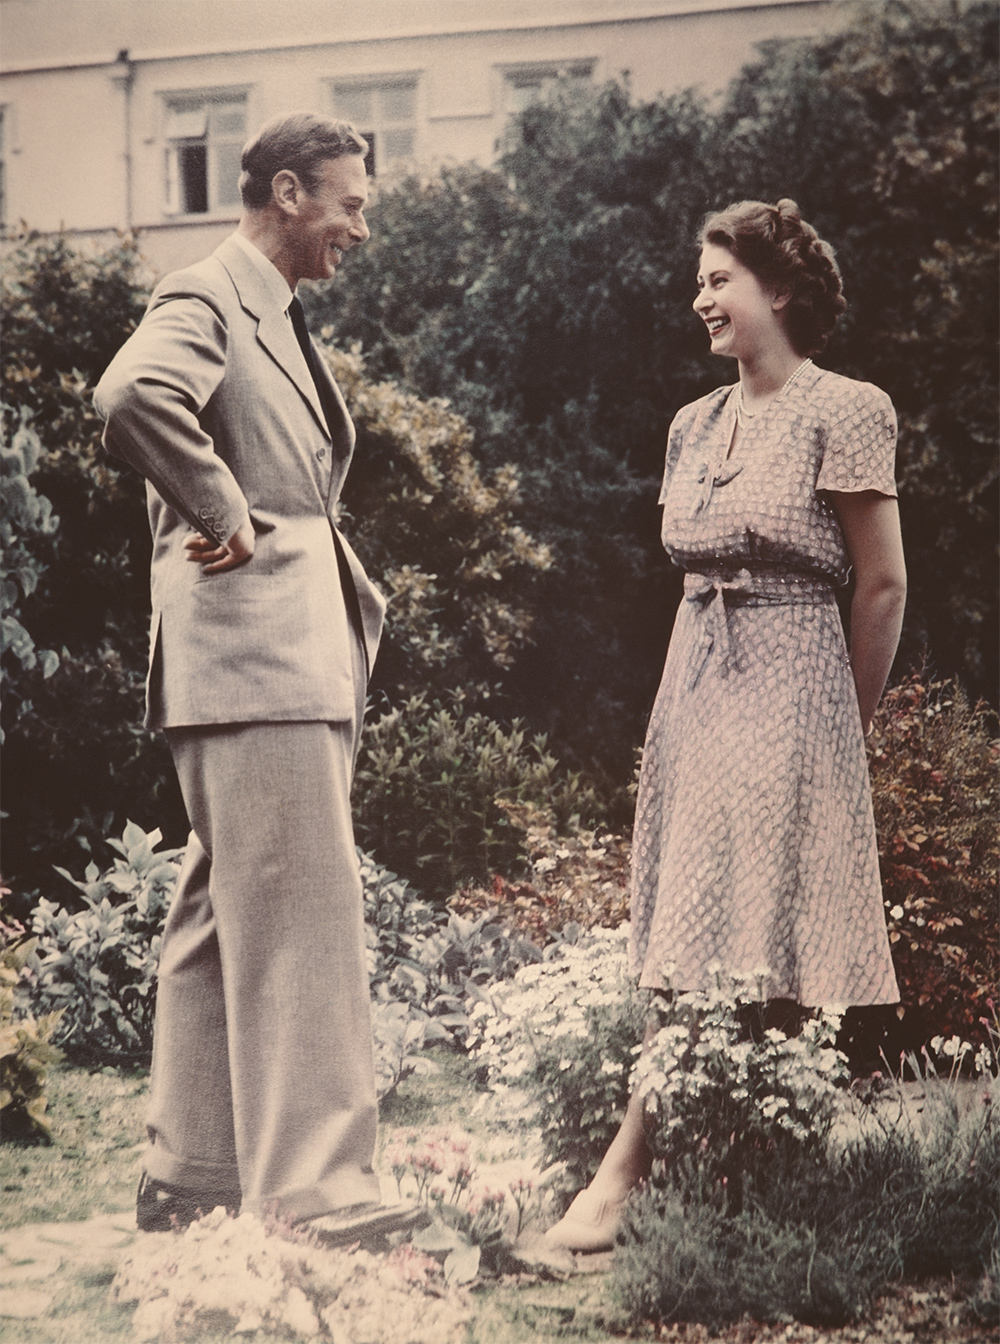 Princess Elizabeth conversing with her father, King George VI in a garden on 8th July 1946. Photo / Getty Images